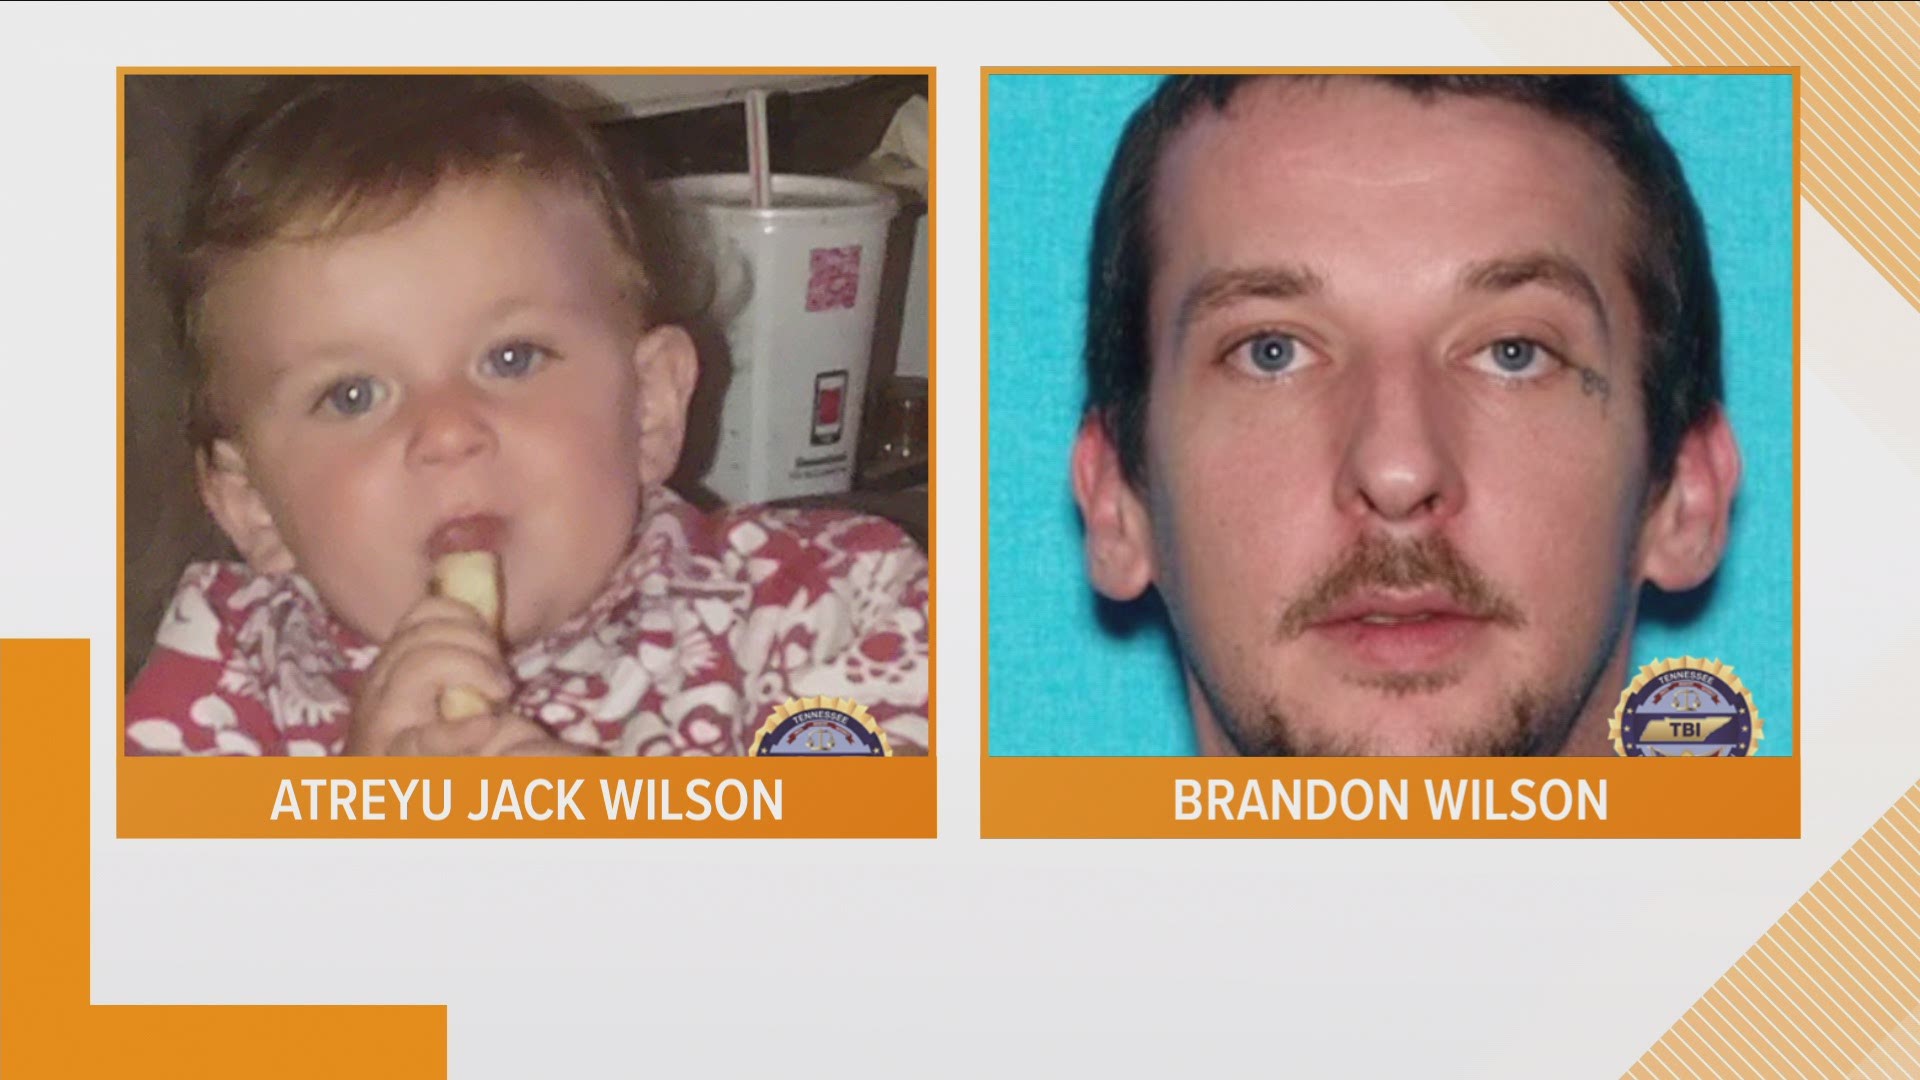 TBI also mentioned that his non-custodial father, Brandon Wilson, has been arrested.